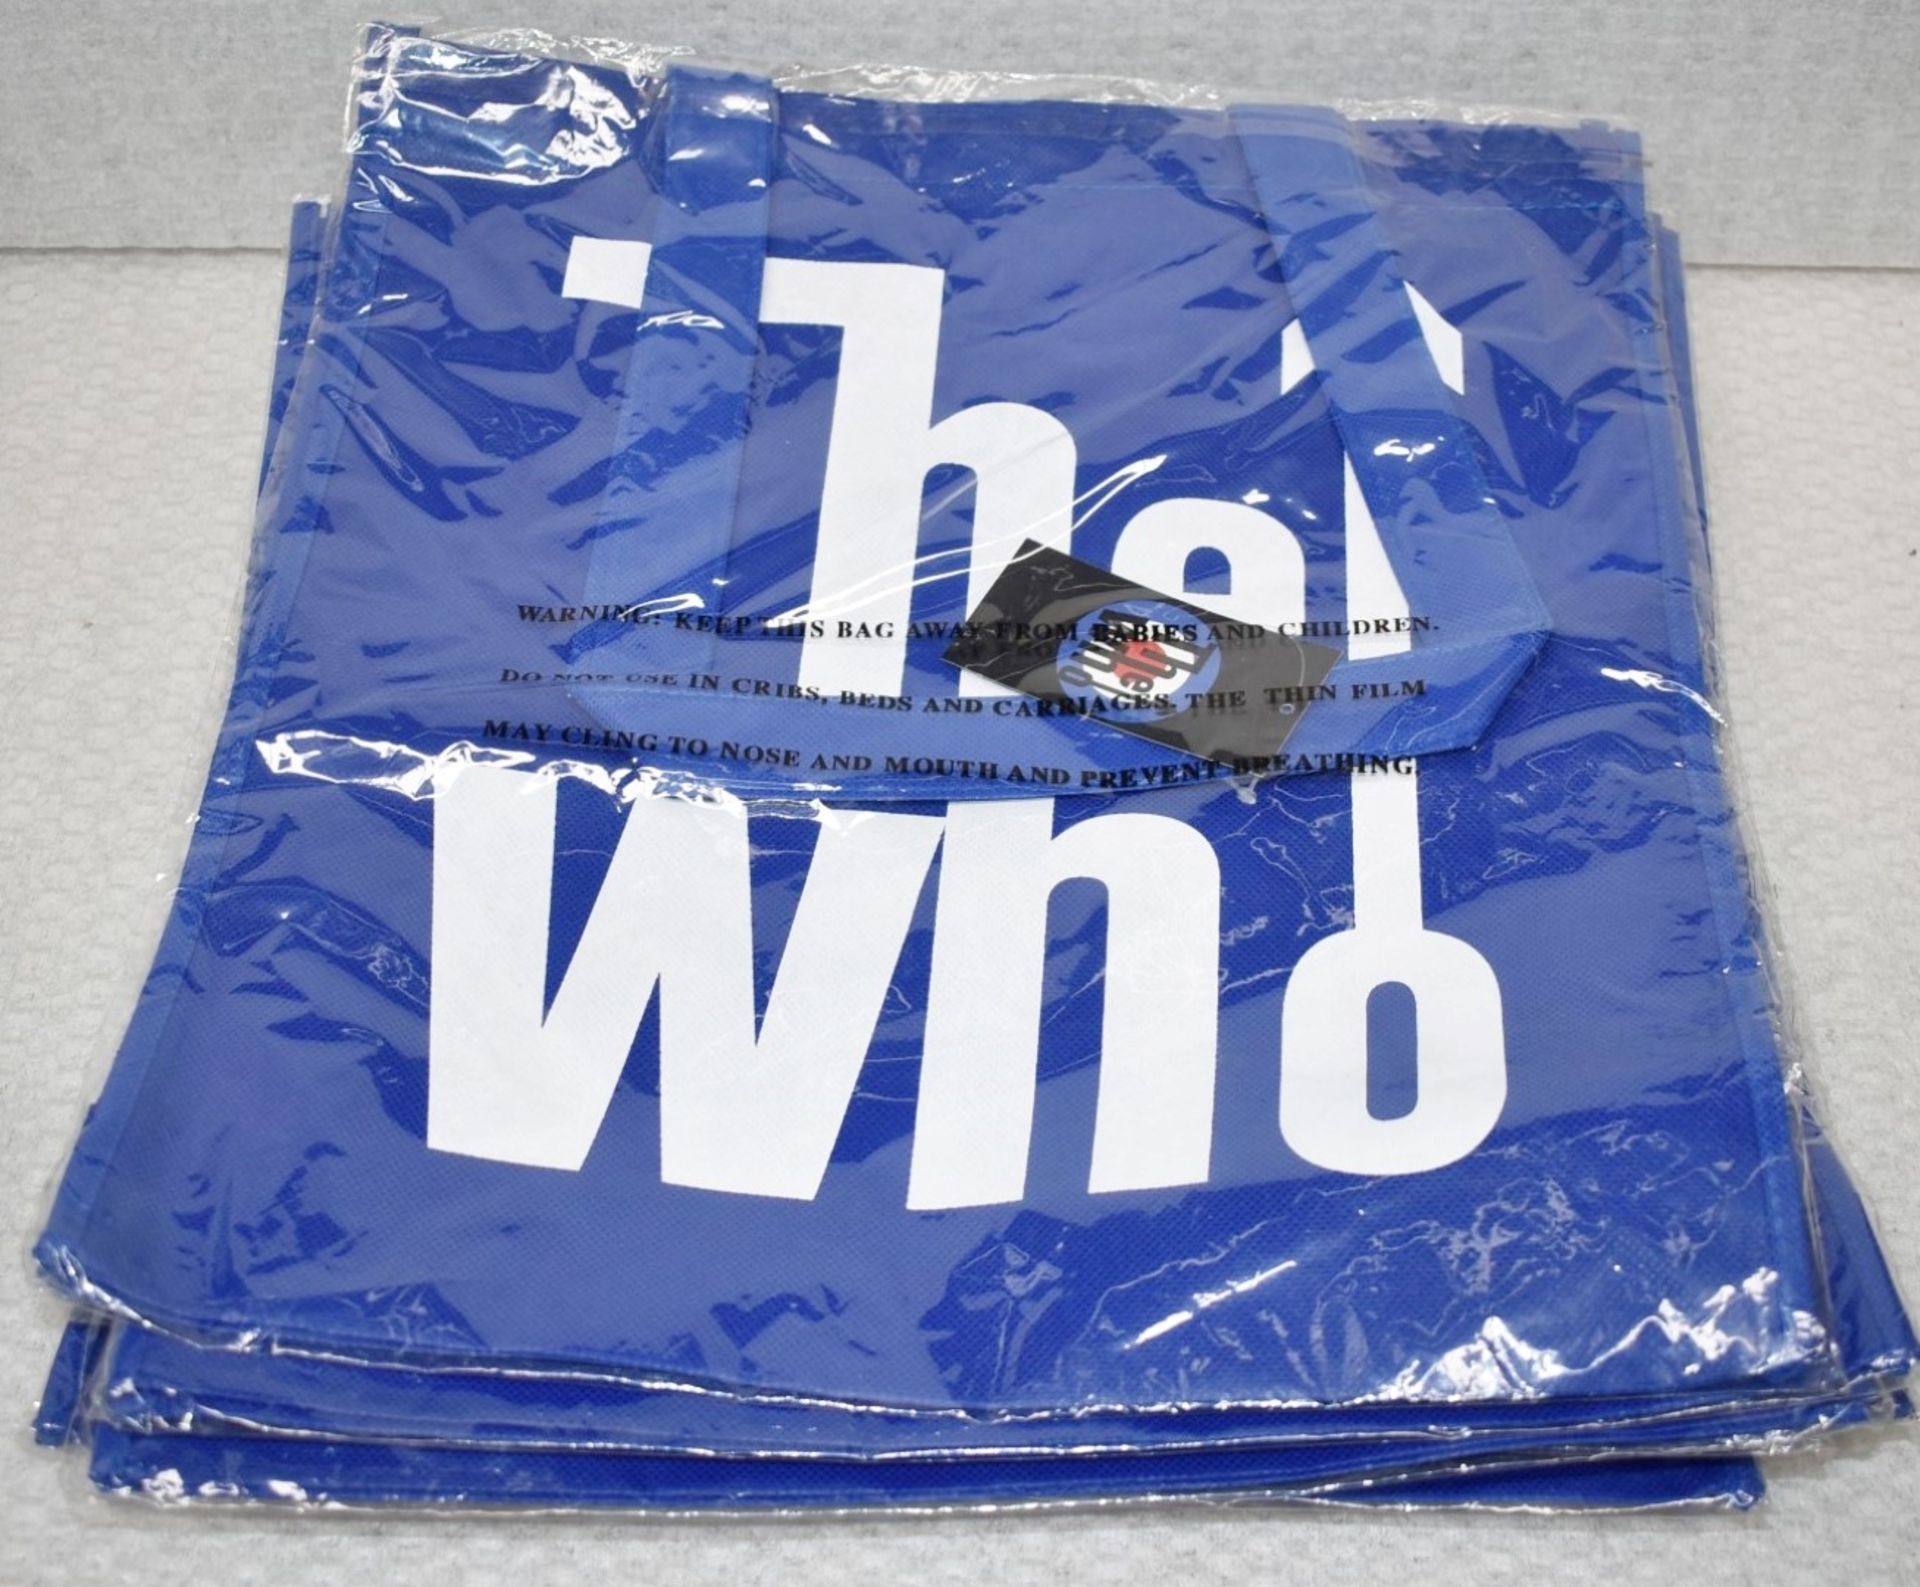 7 x The Who Eco Tote Shopper Bags - Size: 40 x 36 cms - Polypropylene Eco Material With Artwork